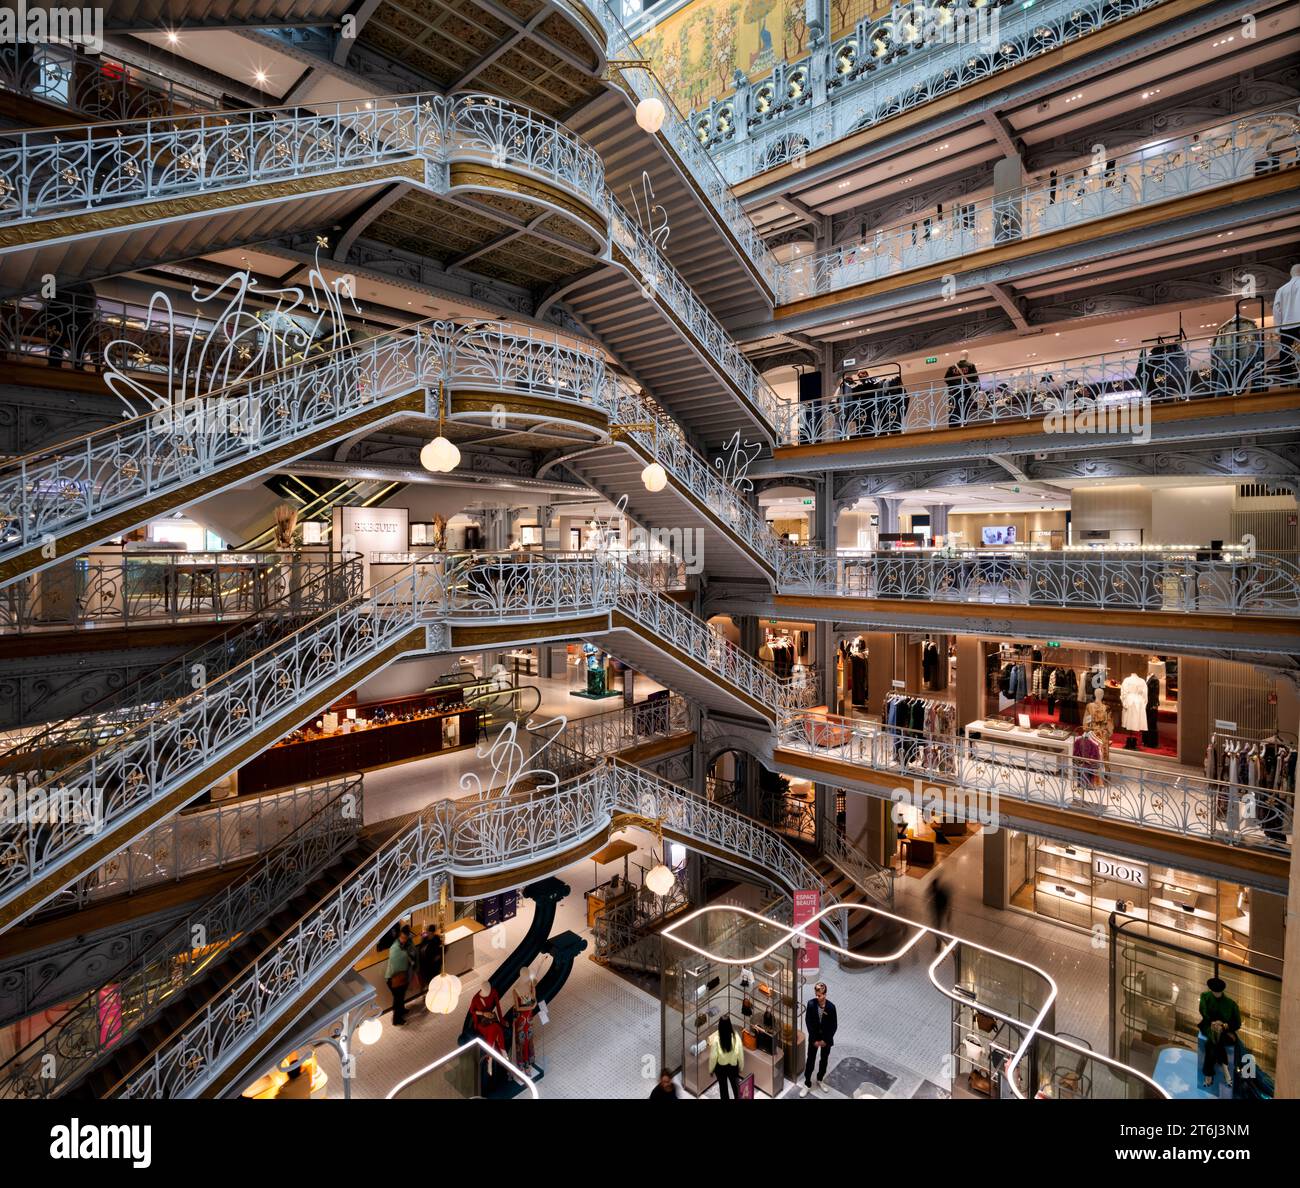 interior, staircase, shopping floors, glass dome, La Samaritaine, exclusive department store, Paris, France Stock Photo